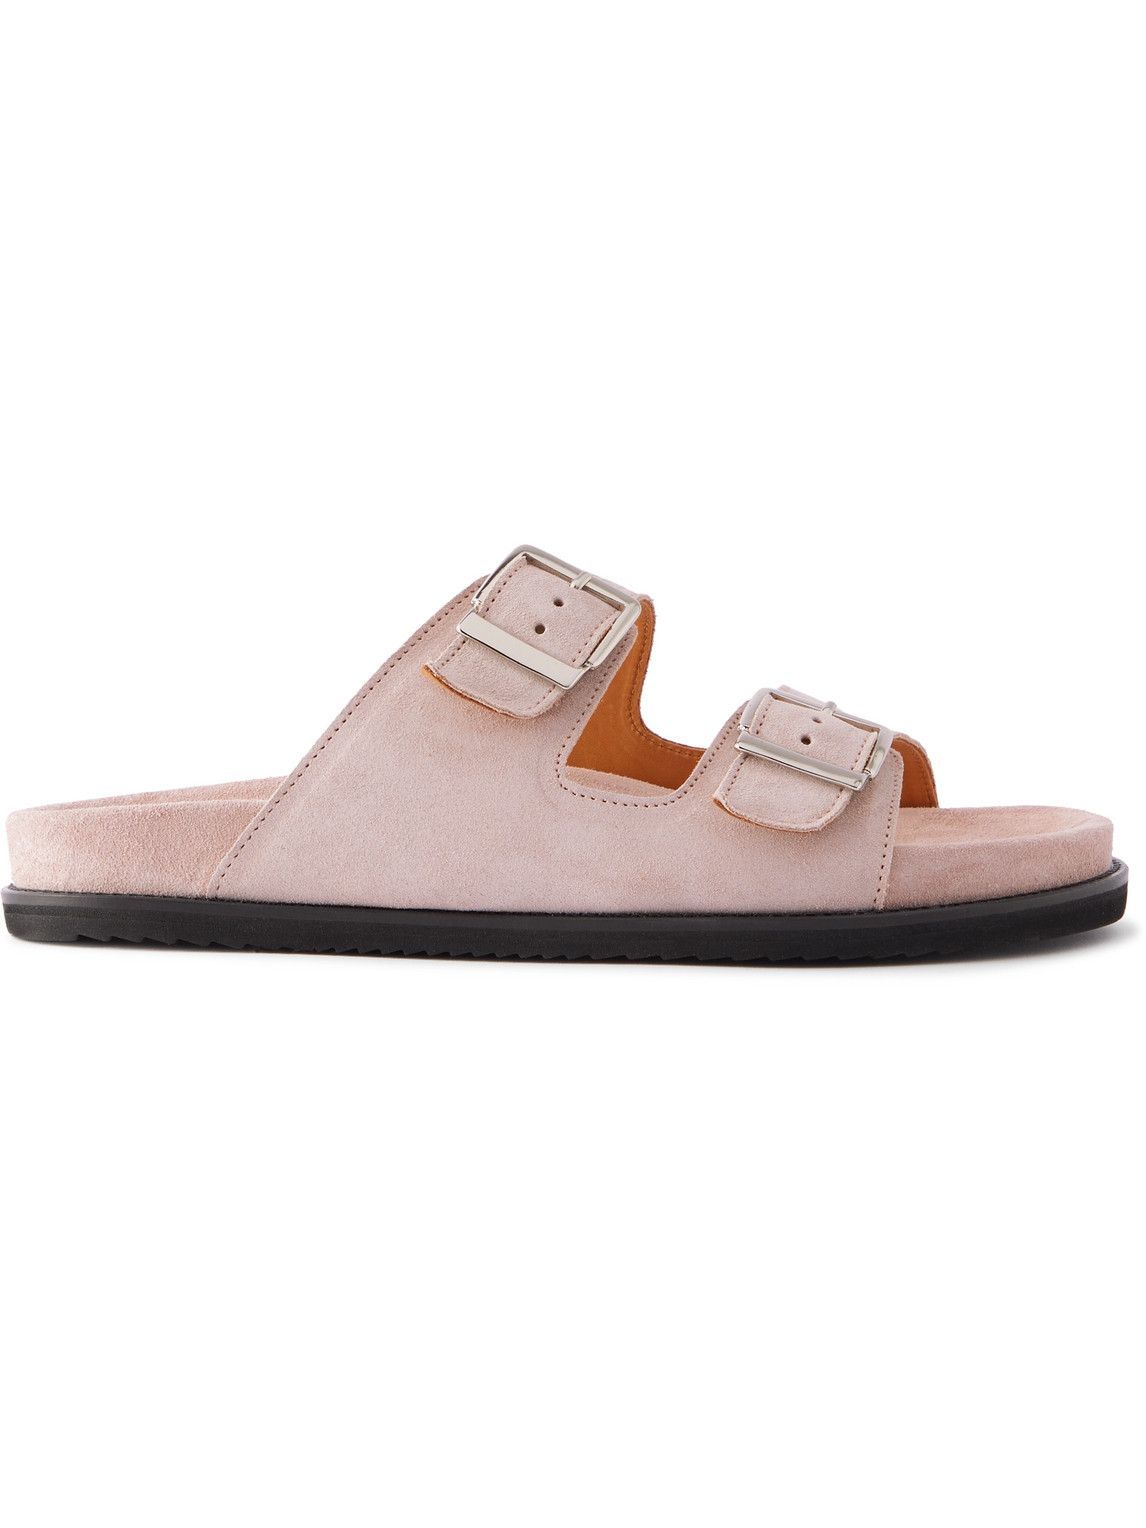 Mr P. - David Regenerated Suede by evolo Sandals - Pink Mr P.